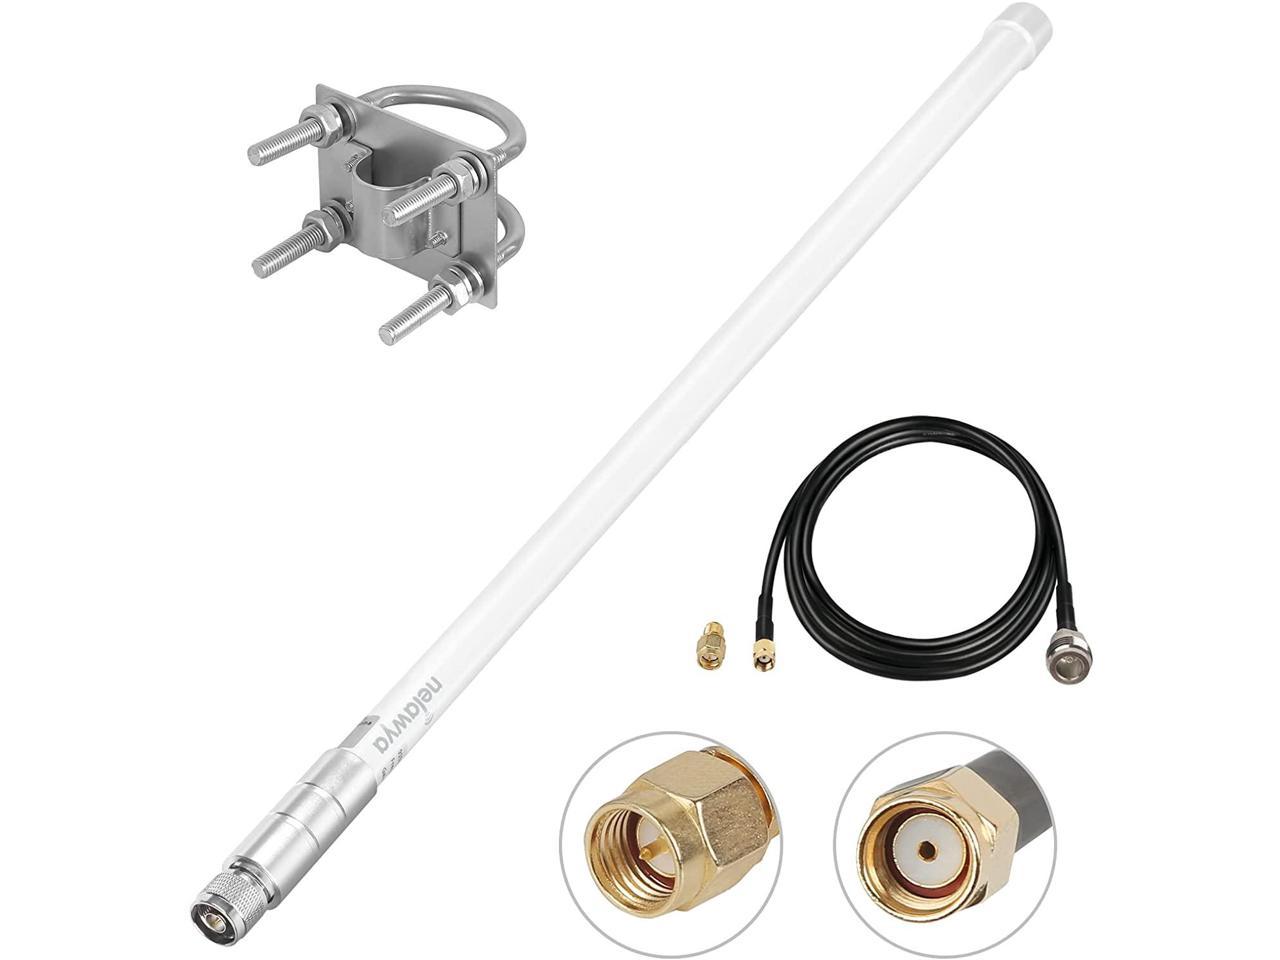 10FT/3Meter L400 Ultra Low Loss N Female to RP-SMA Male SMA Extension Coaxial Cable for 915MHz 868MHz Lora LoRaWan Antenna Bobcat Nebra RAK MNTD SenseCAP M1 Helium Hotspot HNT Miner Antenna 